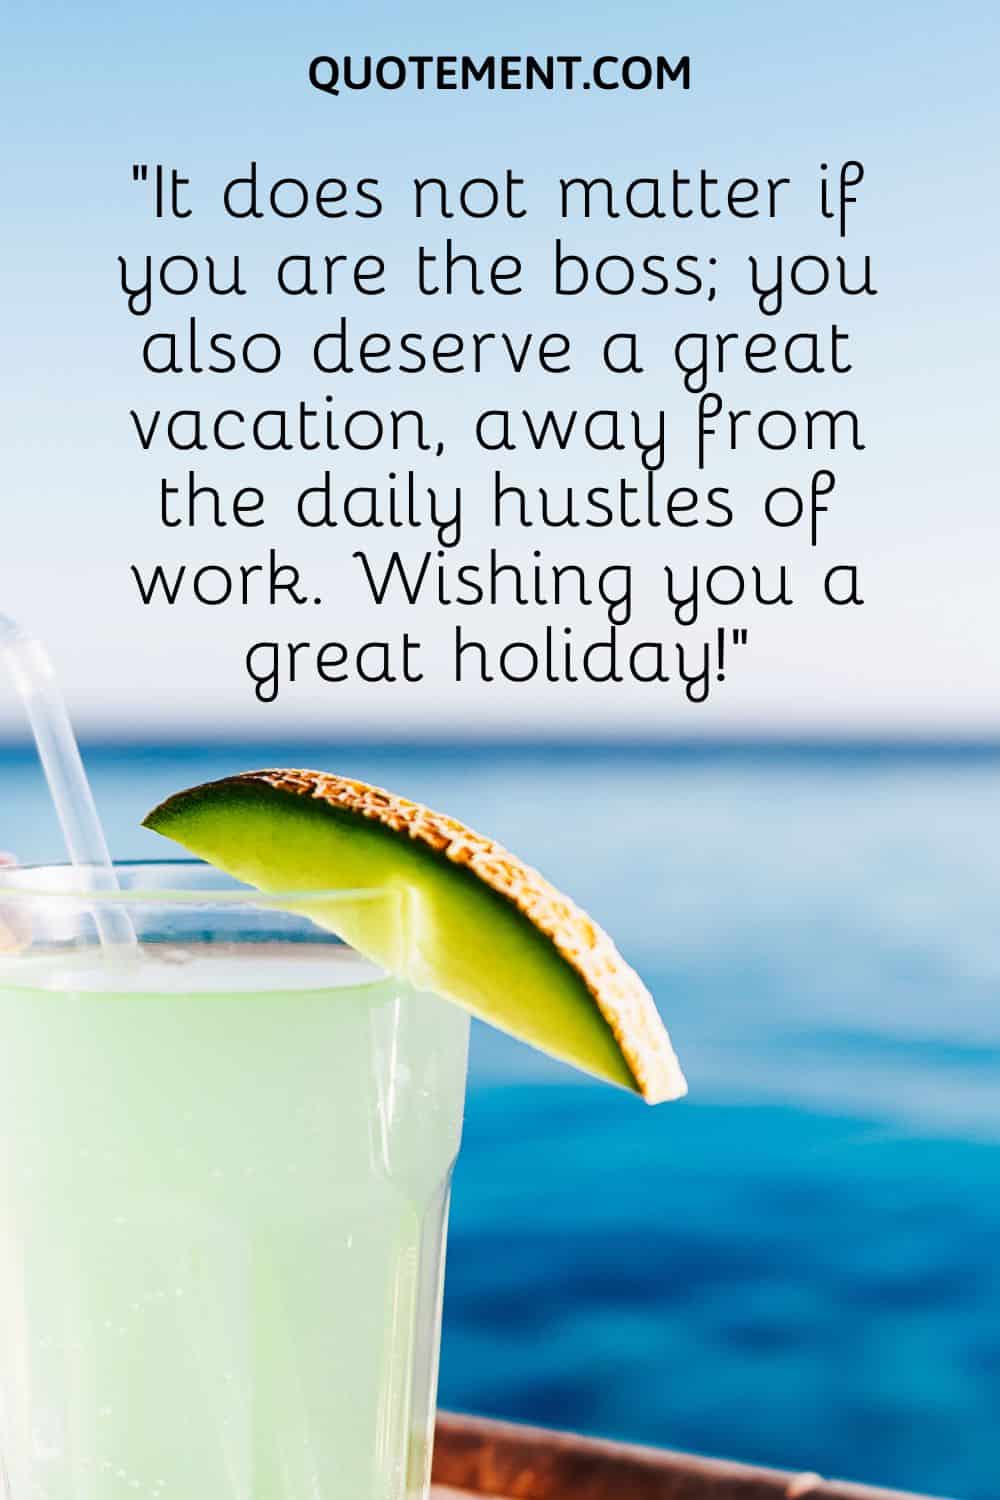 you also deserve a great vacation, away from the daily hustles of work